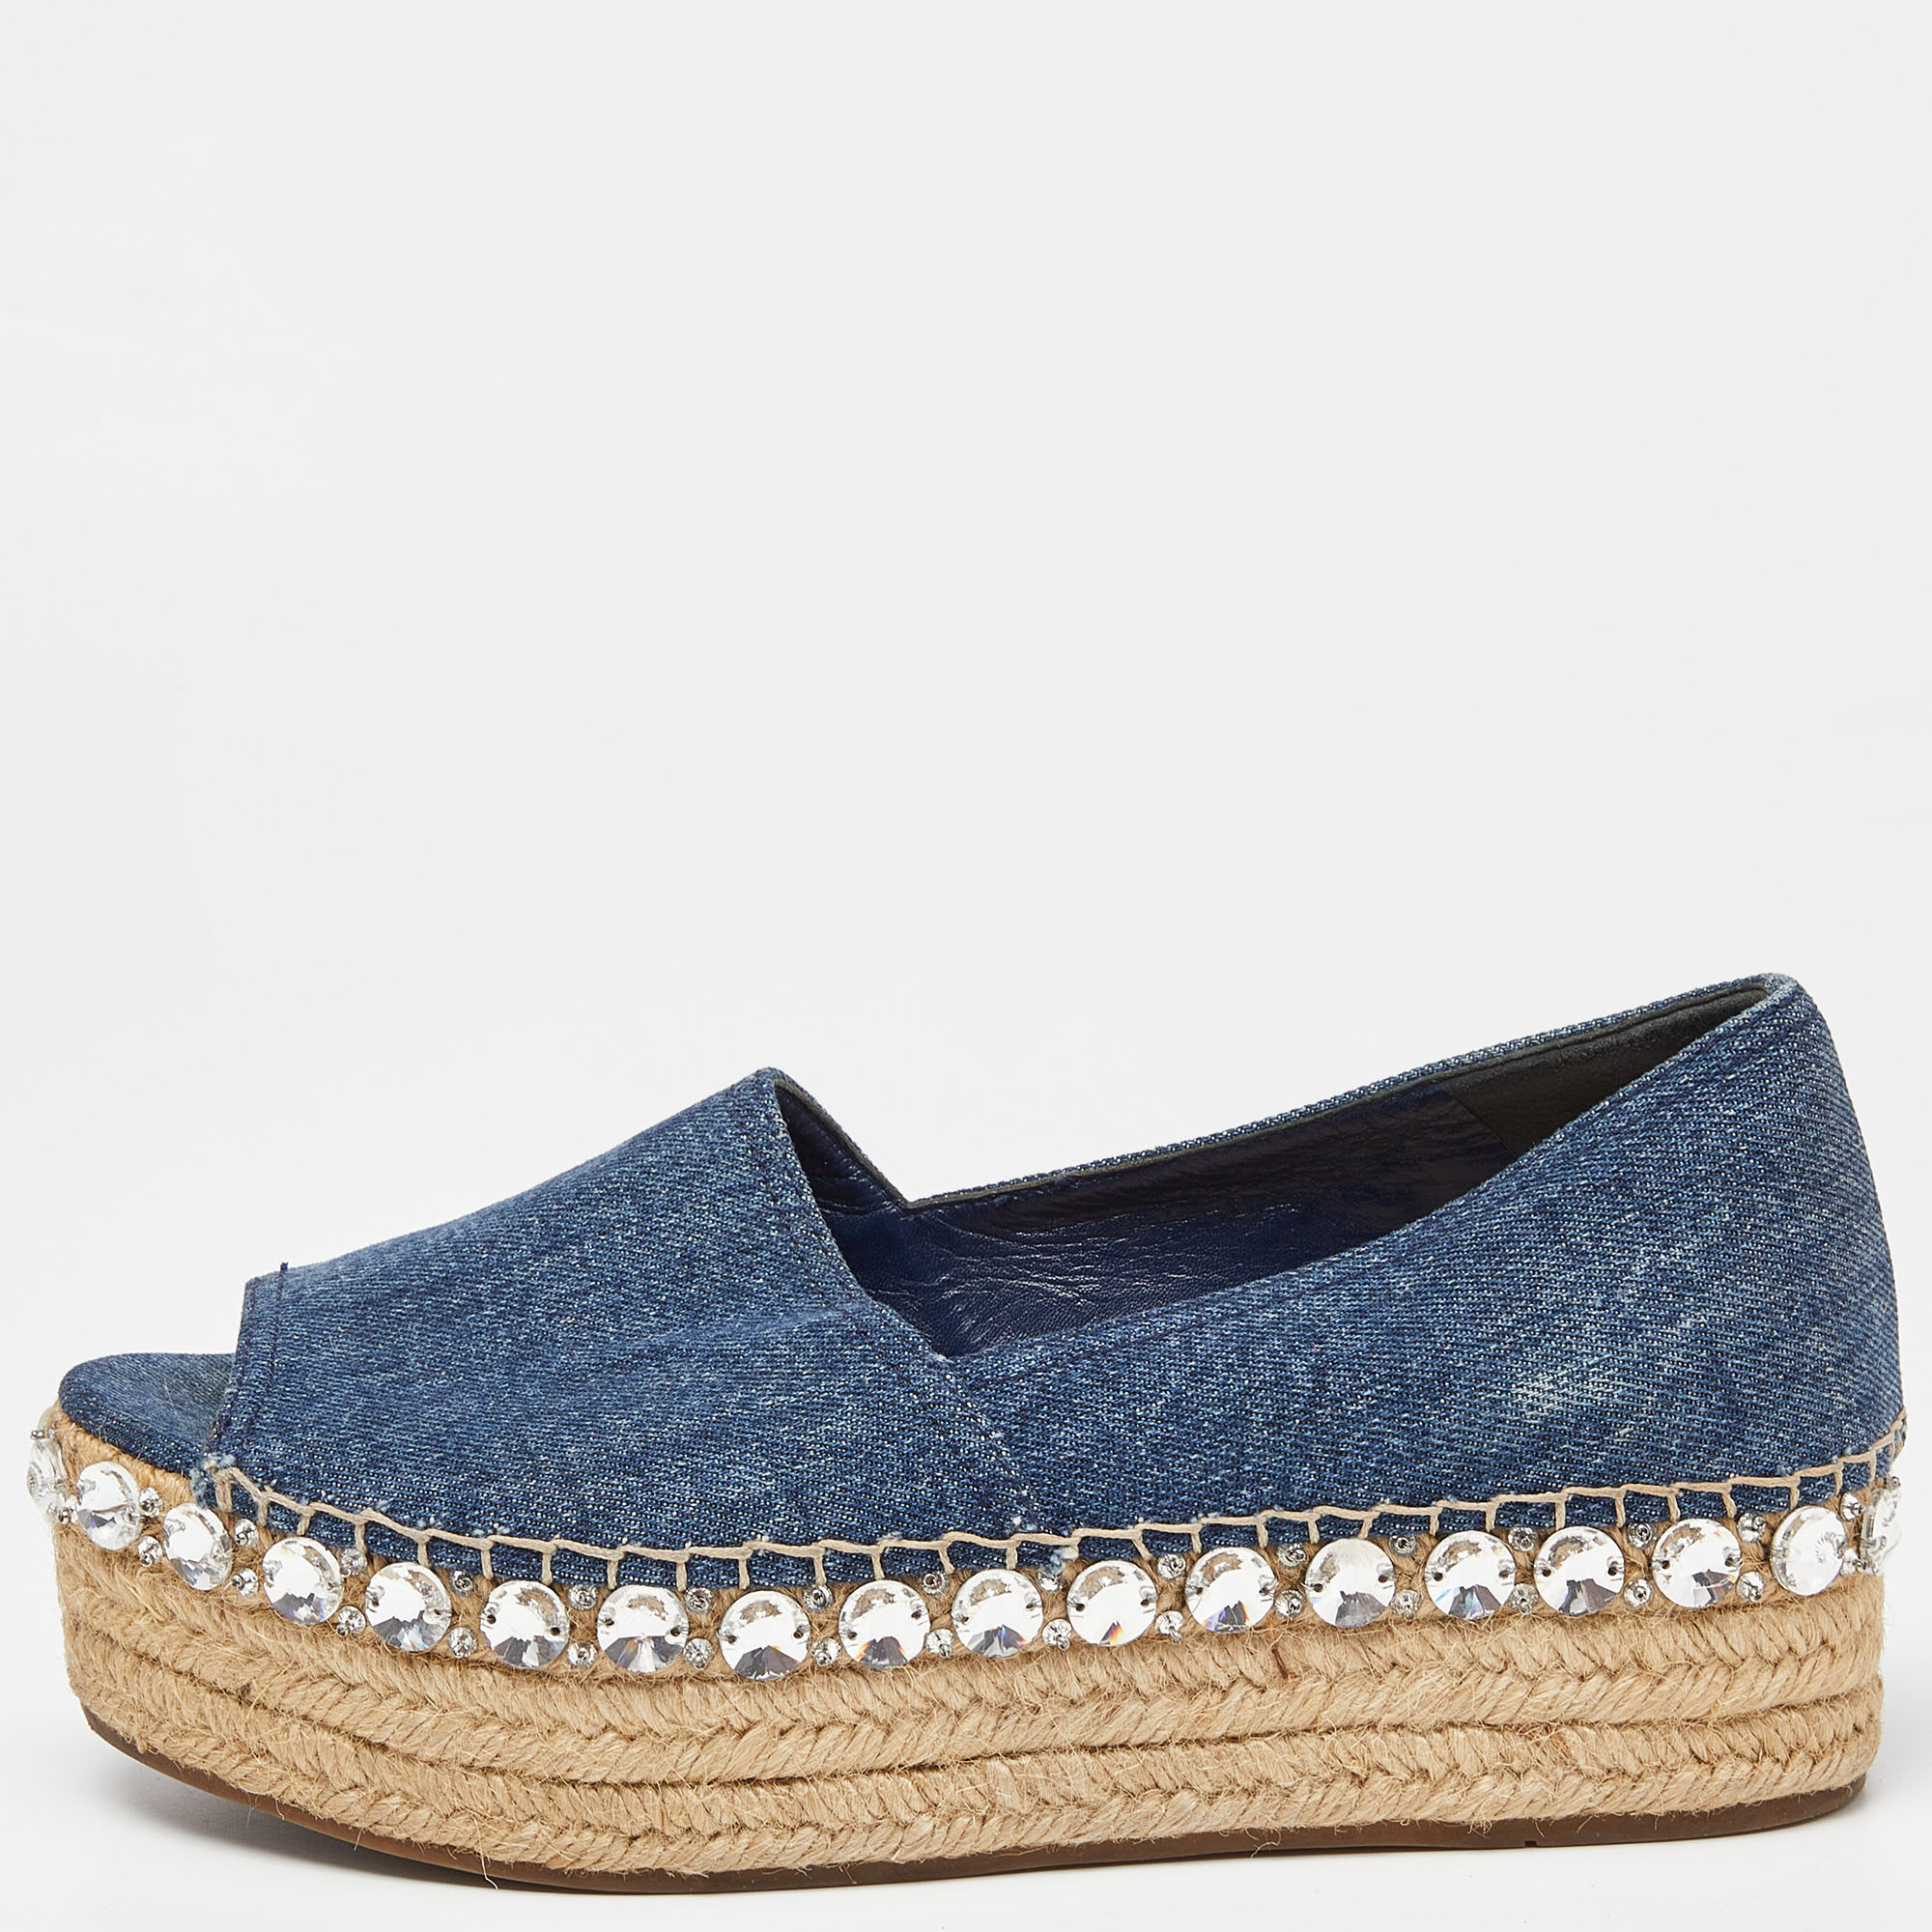 Espadrilles are not just stylish but also comfy and easy to wear. This lovely pair of Miu Miu espadrilles will accompany a casual outfit with perfection. They are made of denim and designed with leather insoles open toes and braided platforms.